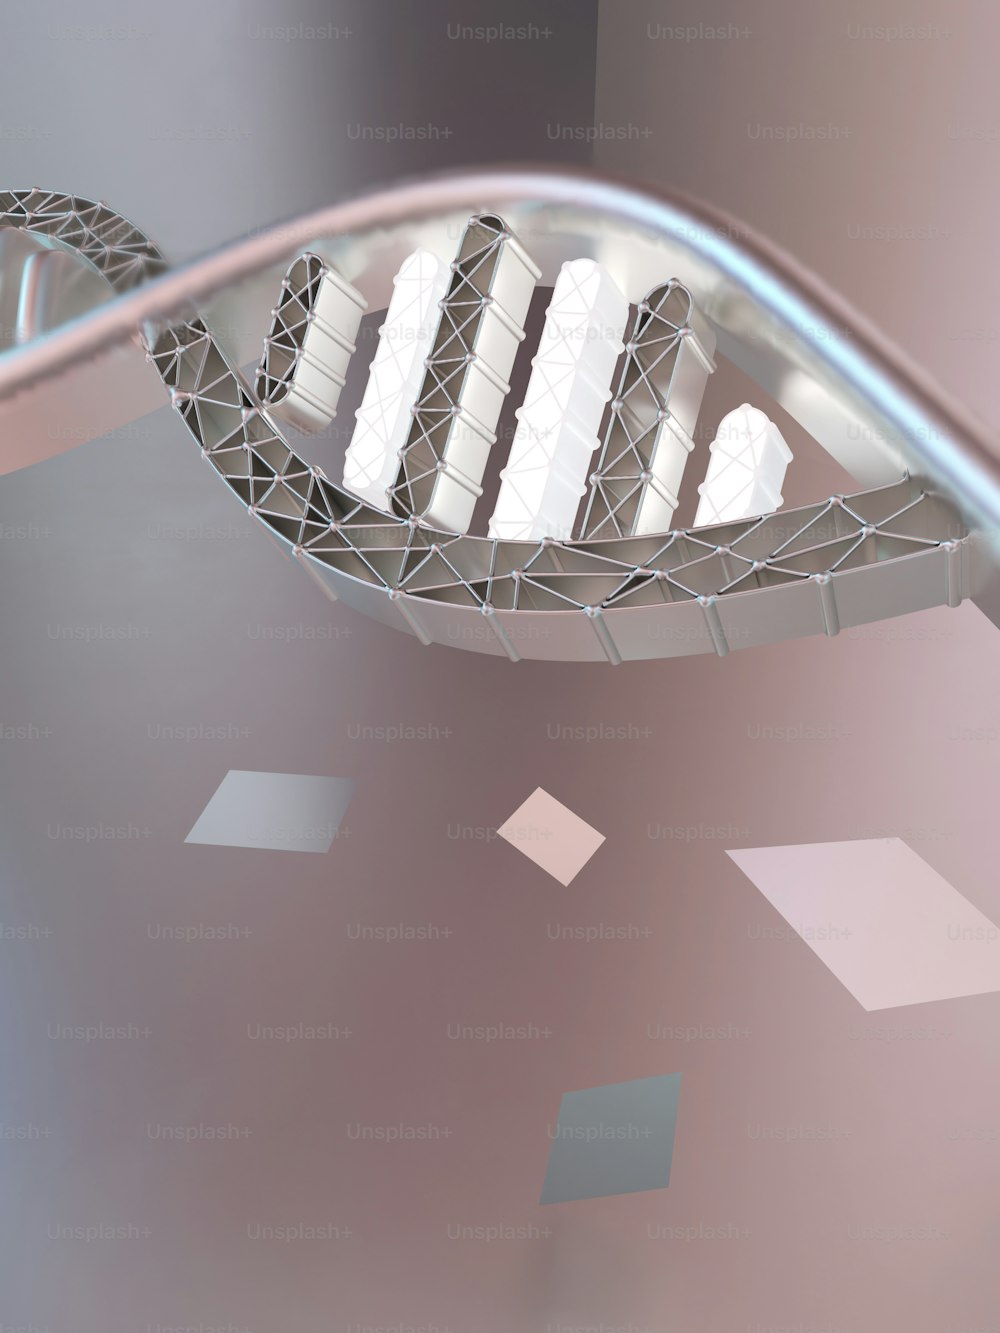 a 3d image of a structure with a spiral design